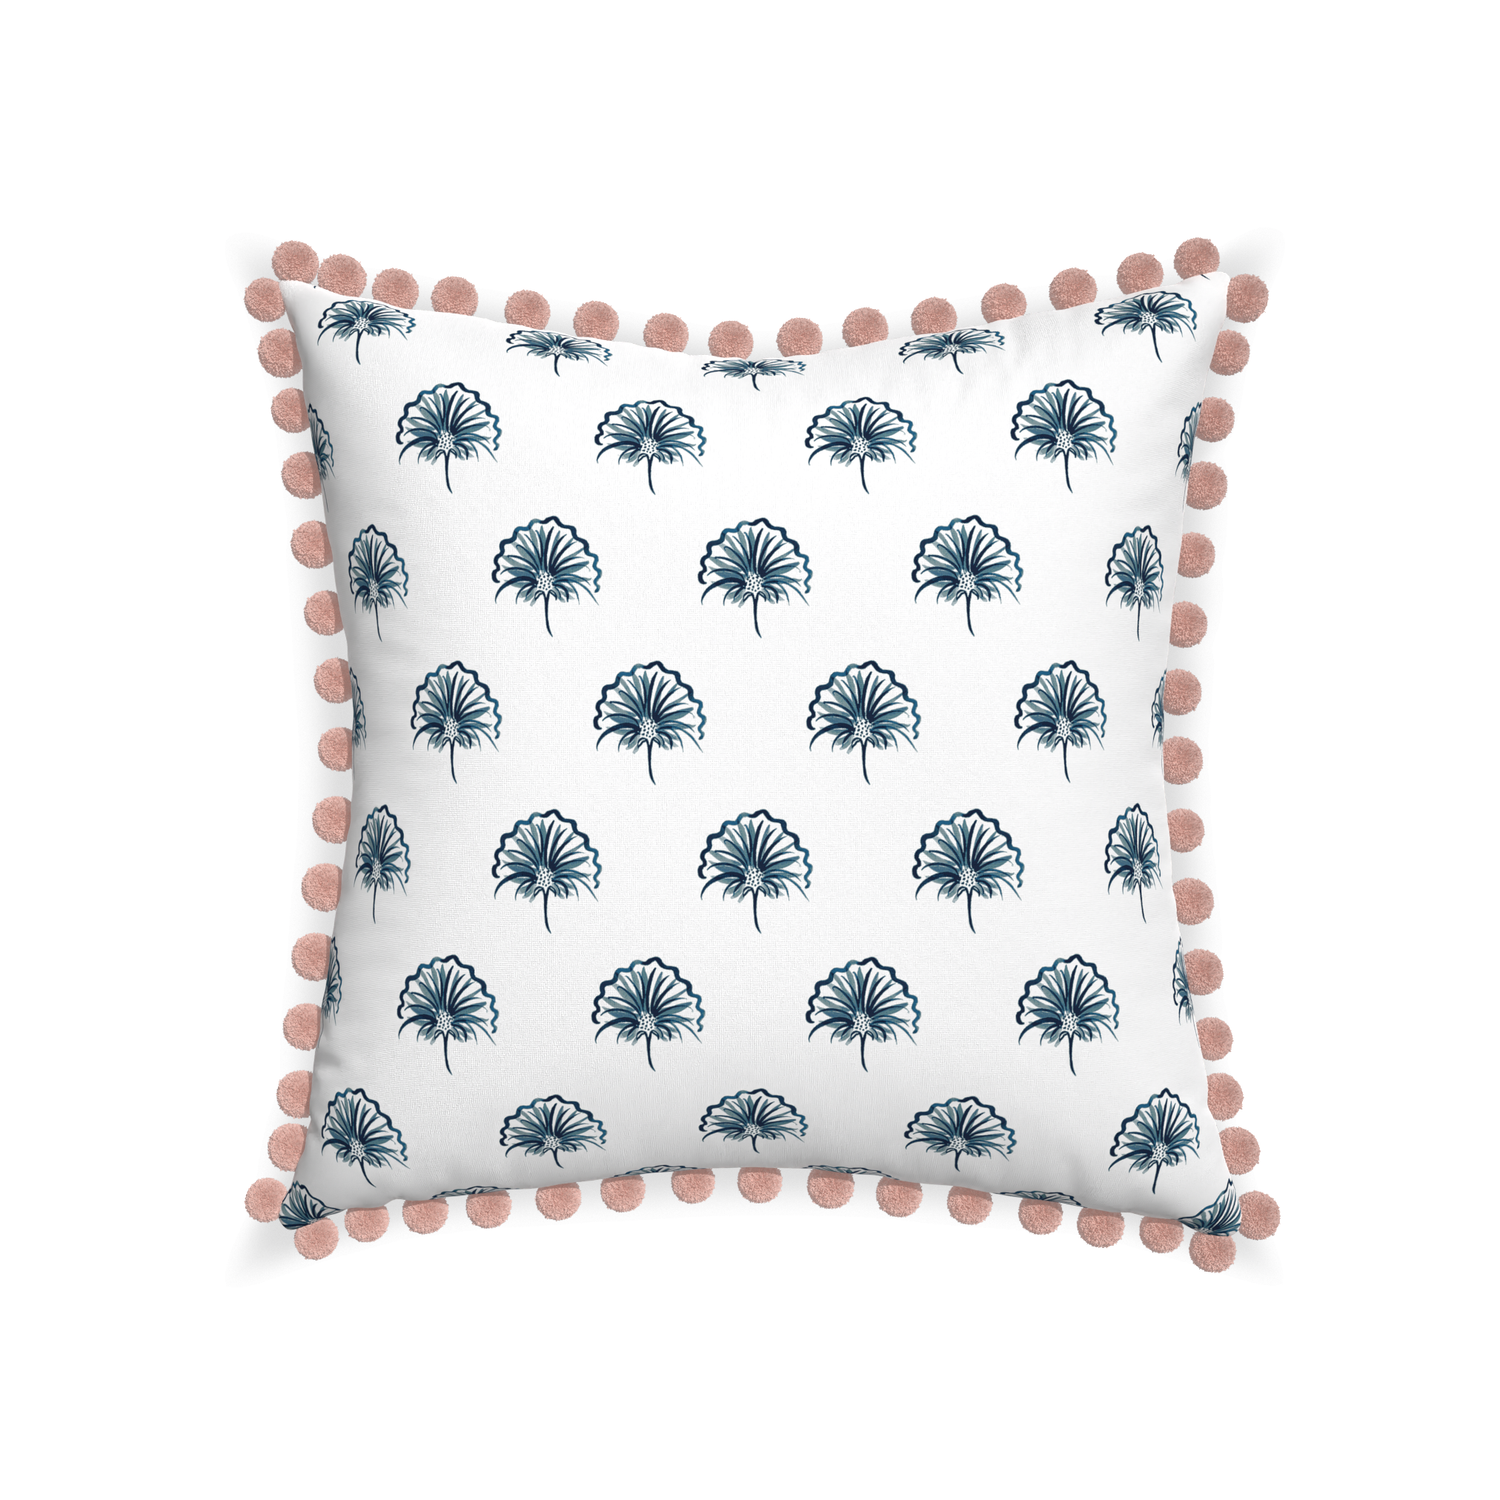 22-square penelope midnight custom floral navypillow with rose pom pom on white background